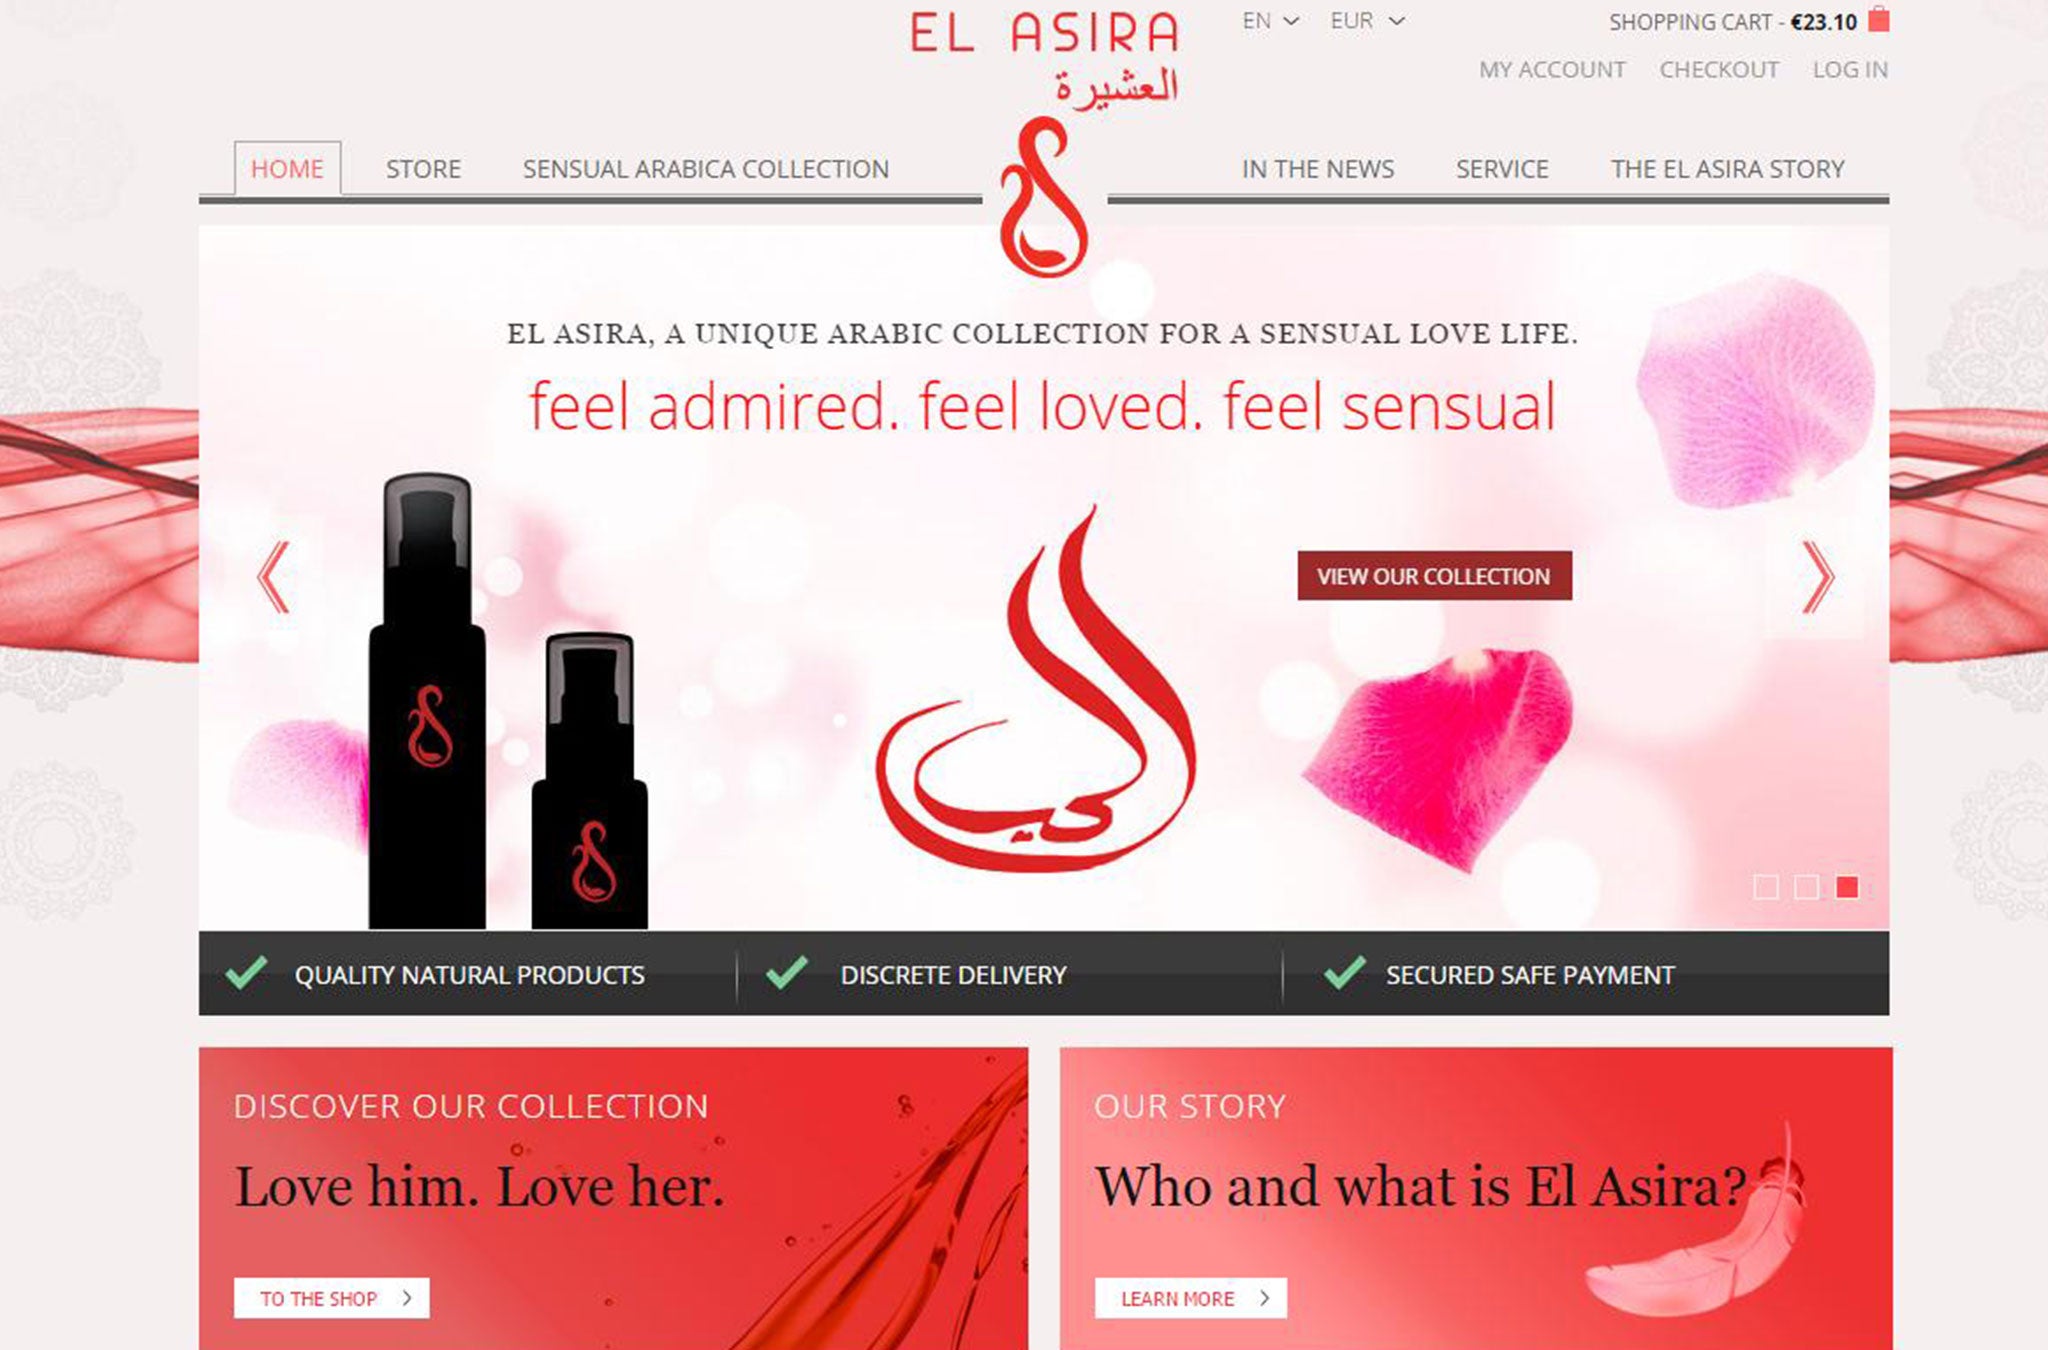 El Asira specialises in creams and oils for a 'sensual love life'